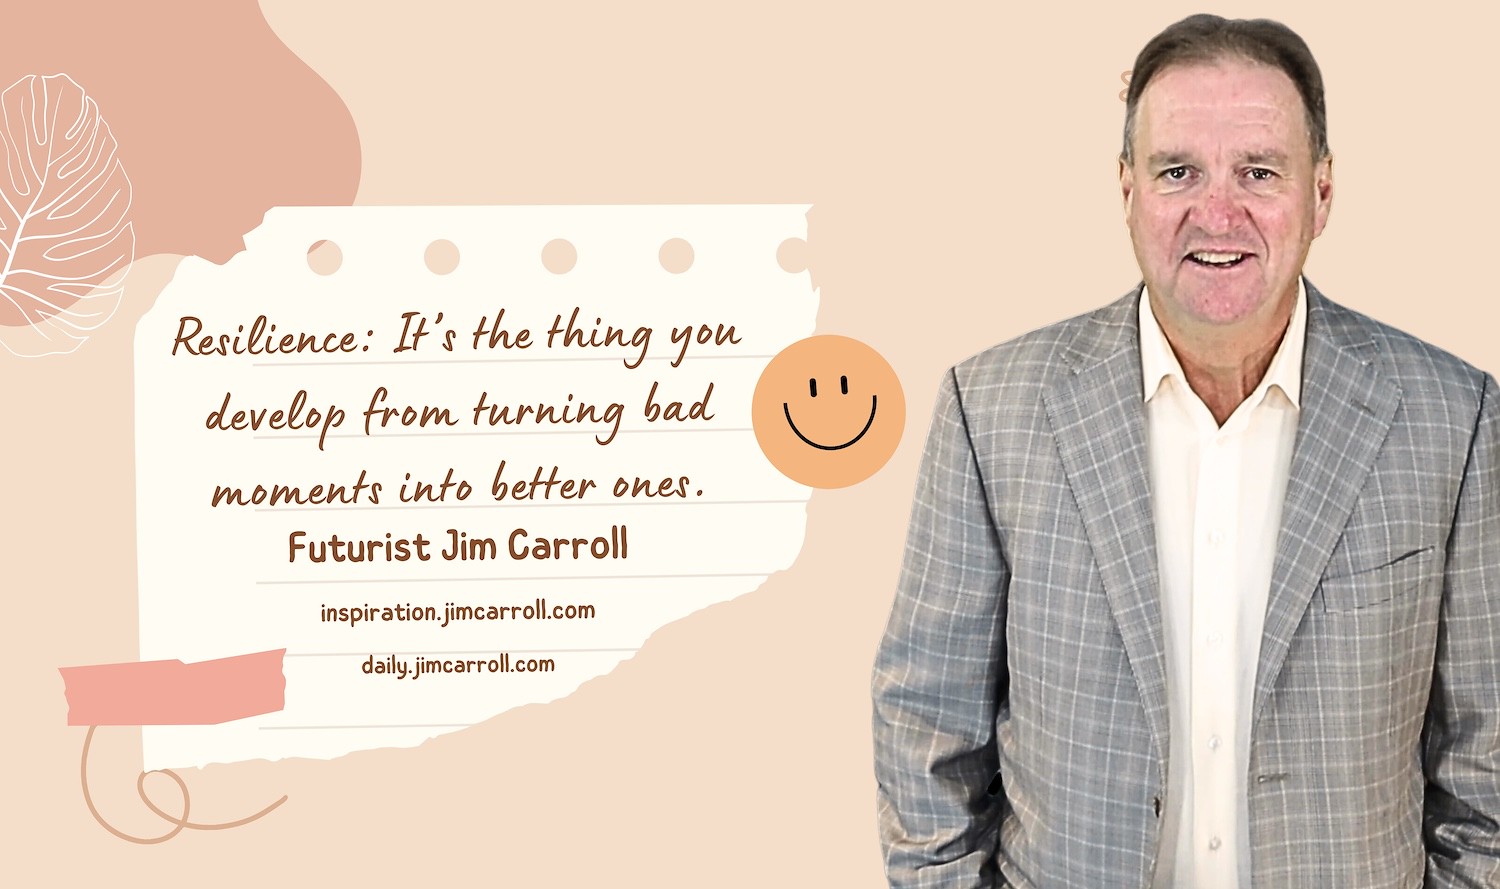 "Resilience: It's the thing you develop by turning bad moments into better ones." - Futurist Jim Carroll